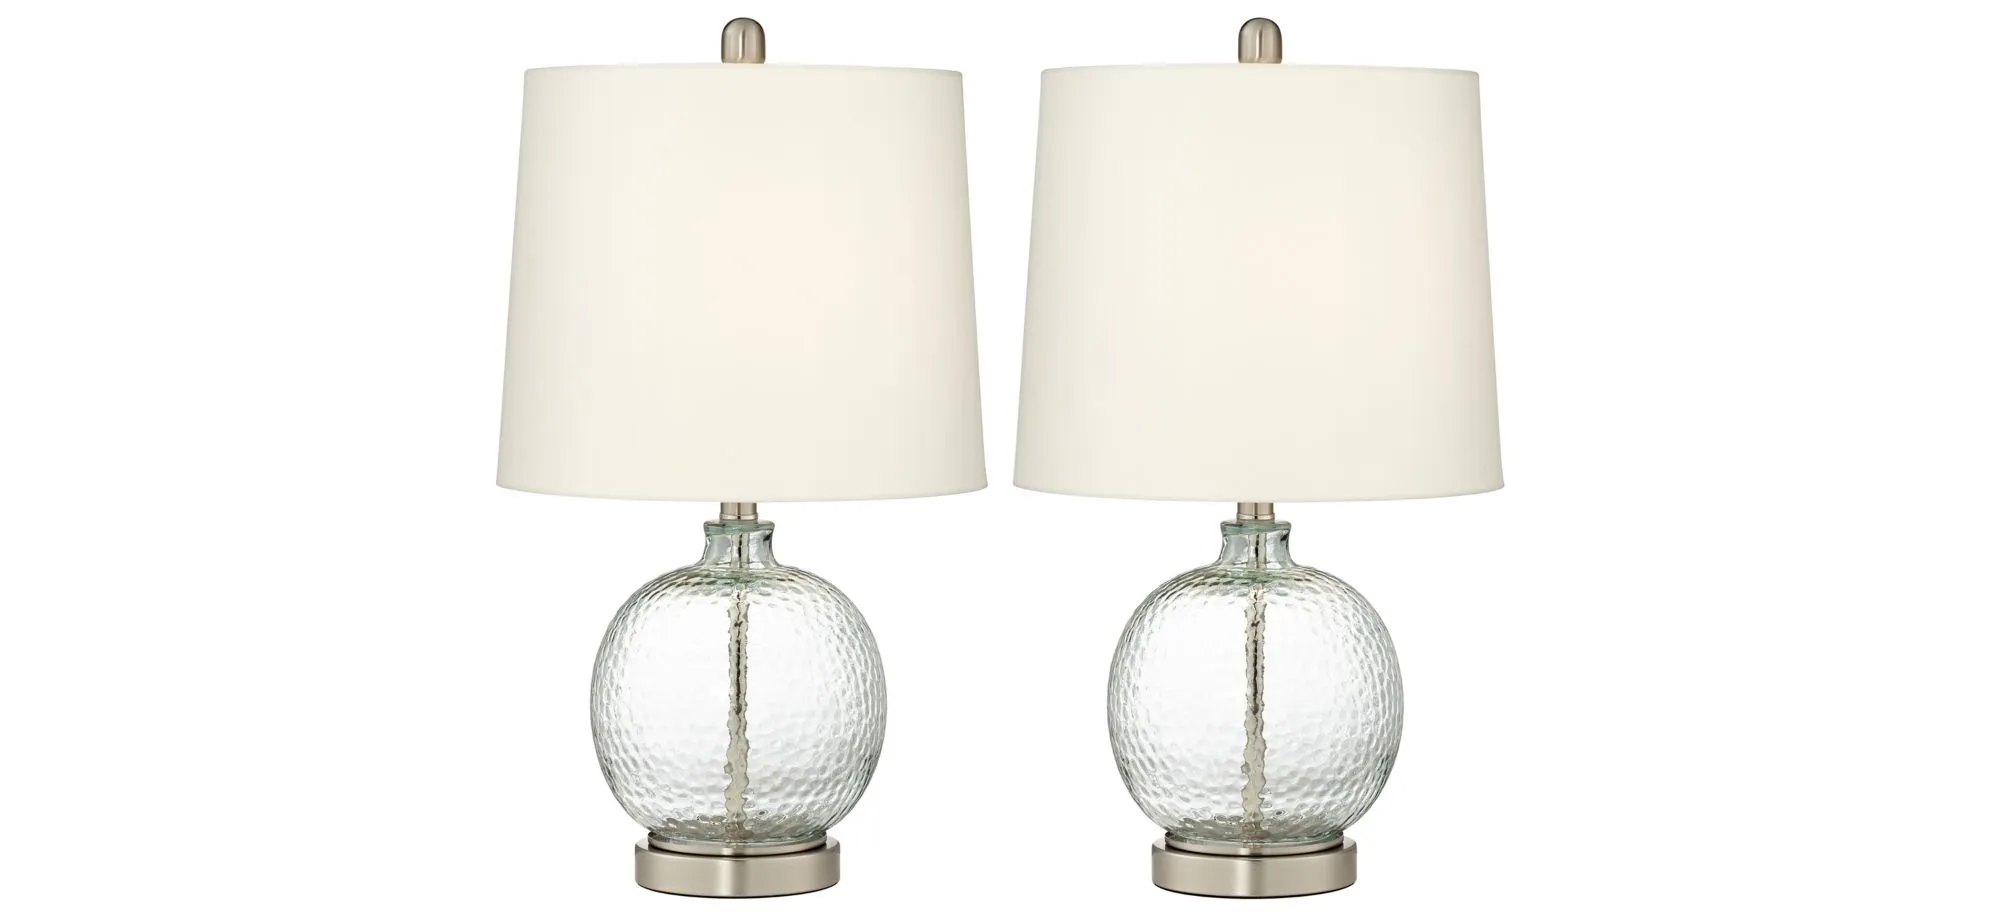 Saxby Table Lamp: Set of 2 in Brushed Nickel/Brushed Steel by Pacific Coast